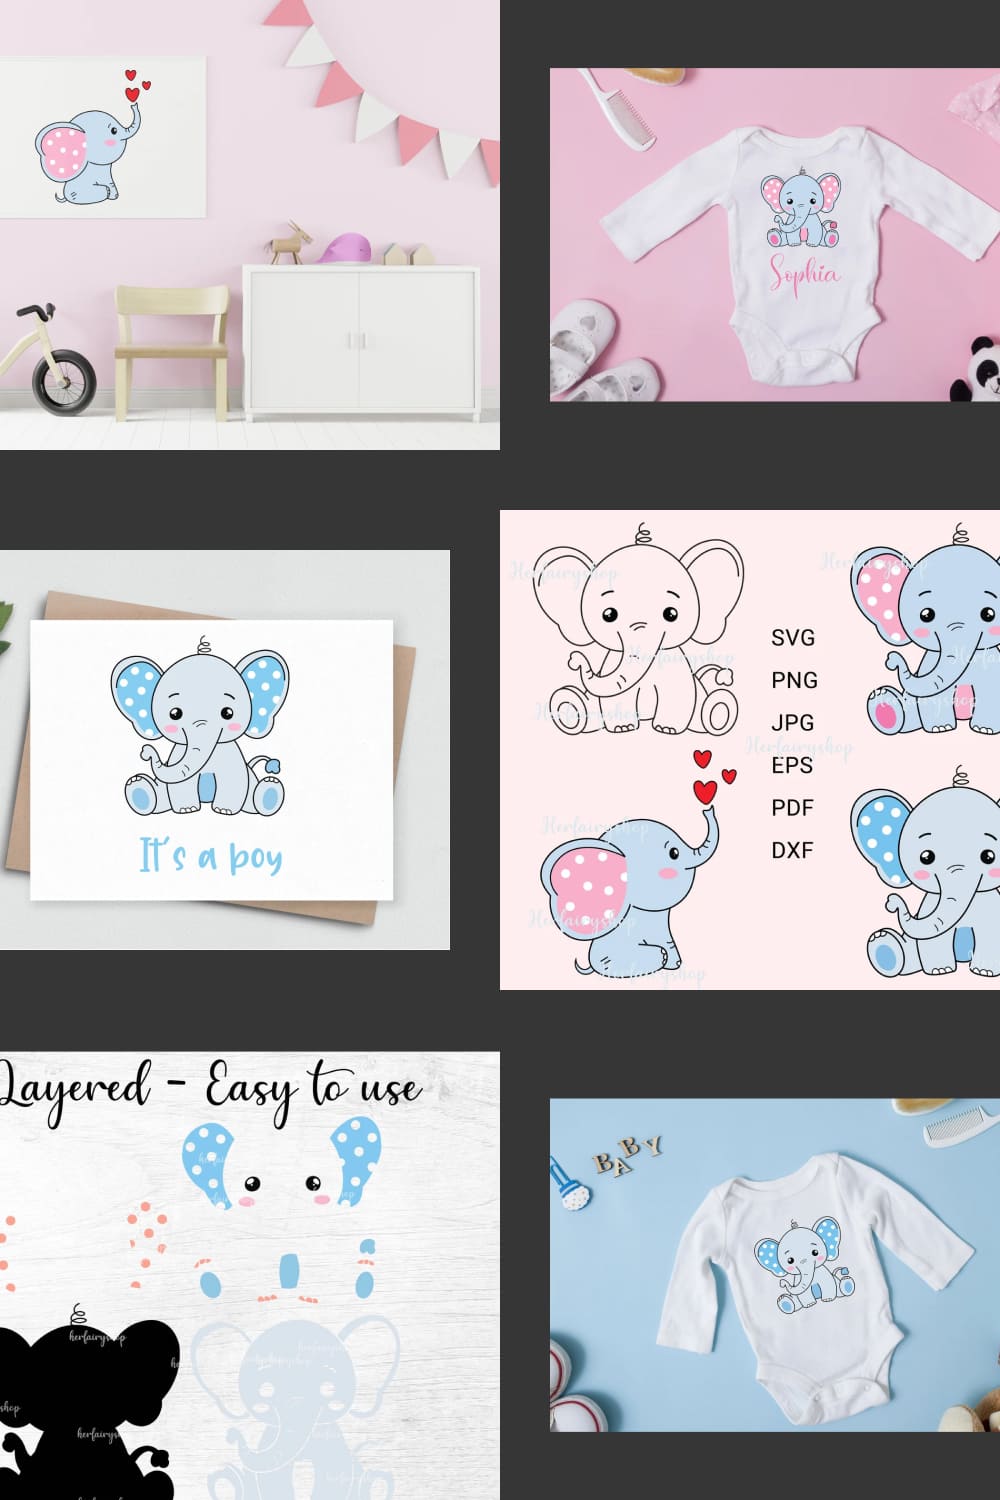 This cute baby elephant is perfect for your DIY children's crafts.